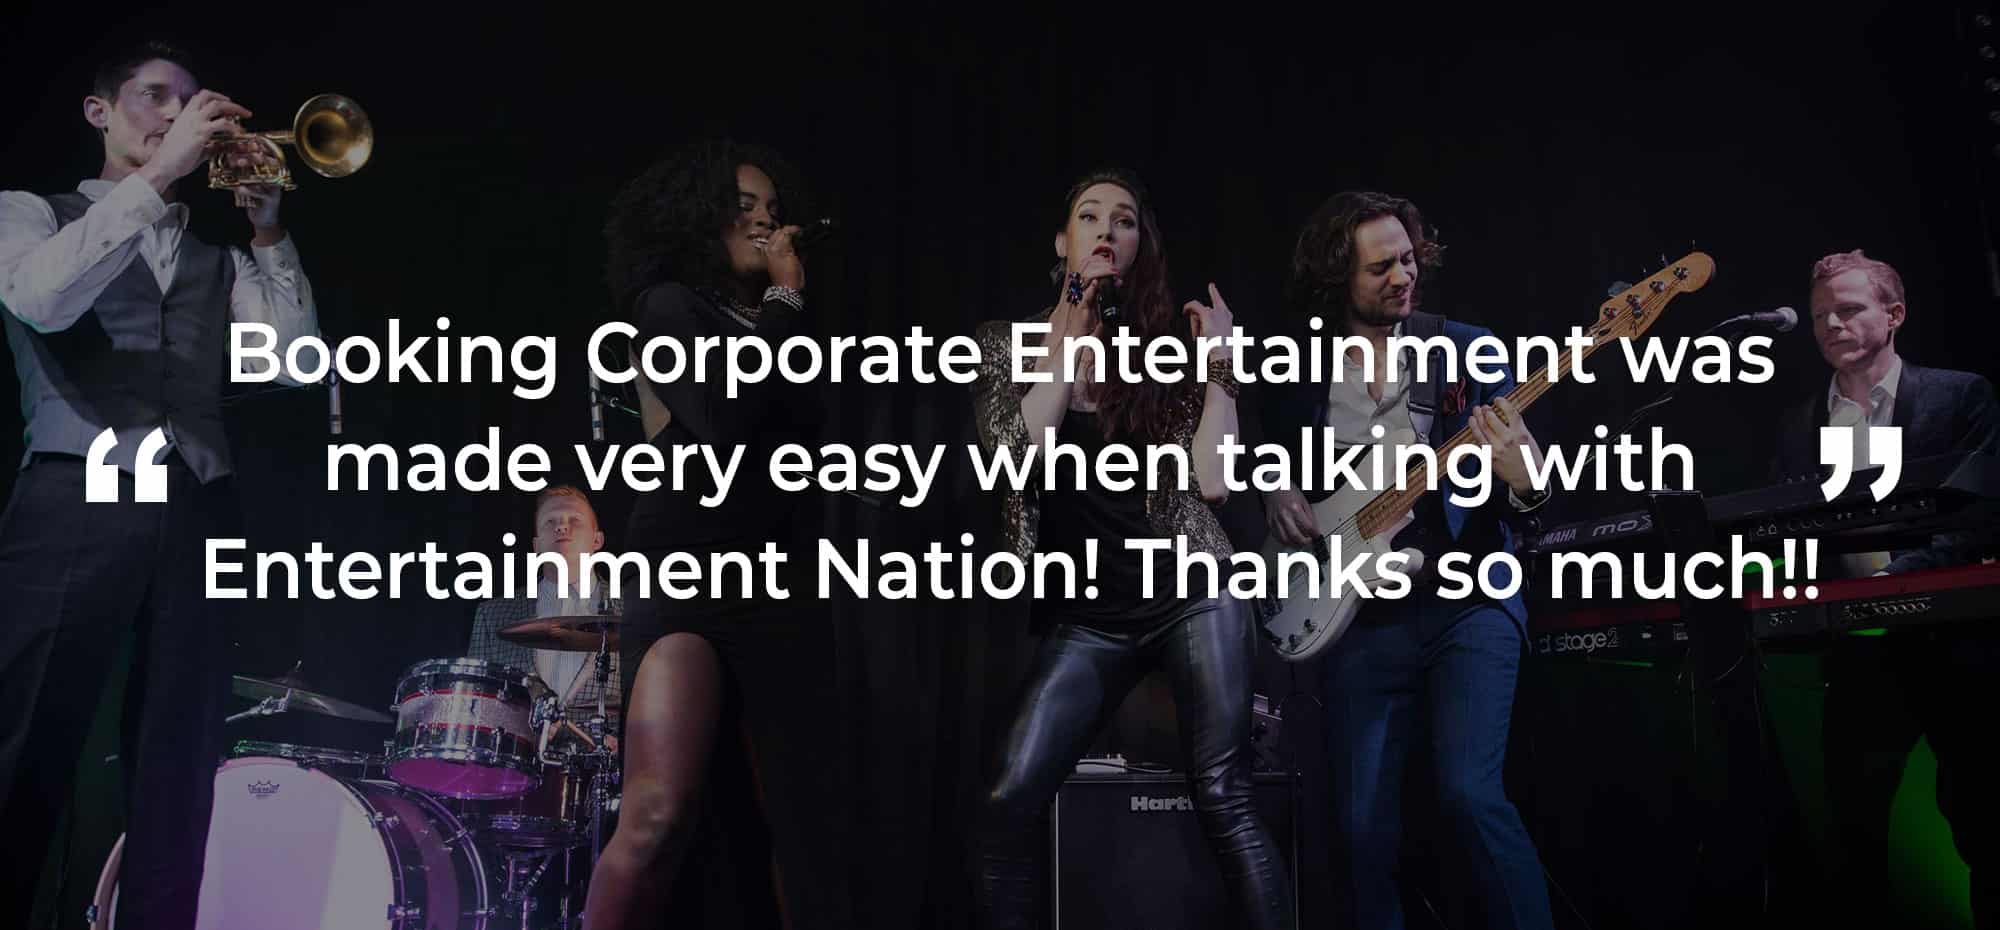 Review of Corporate Entertainment Sheffield